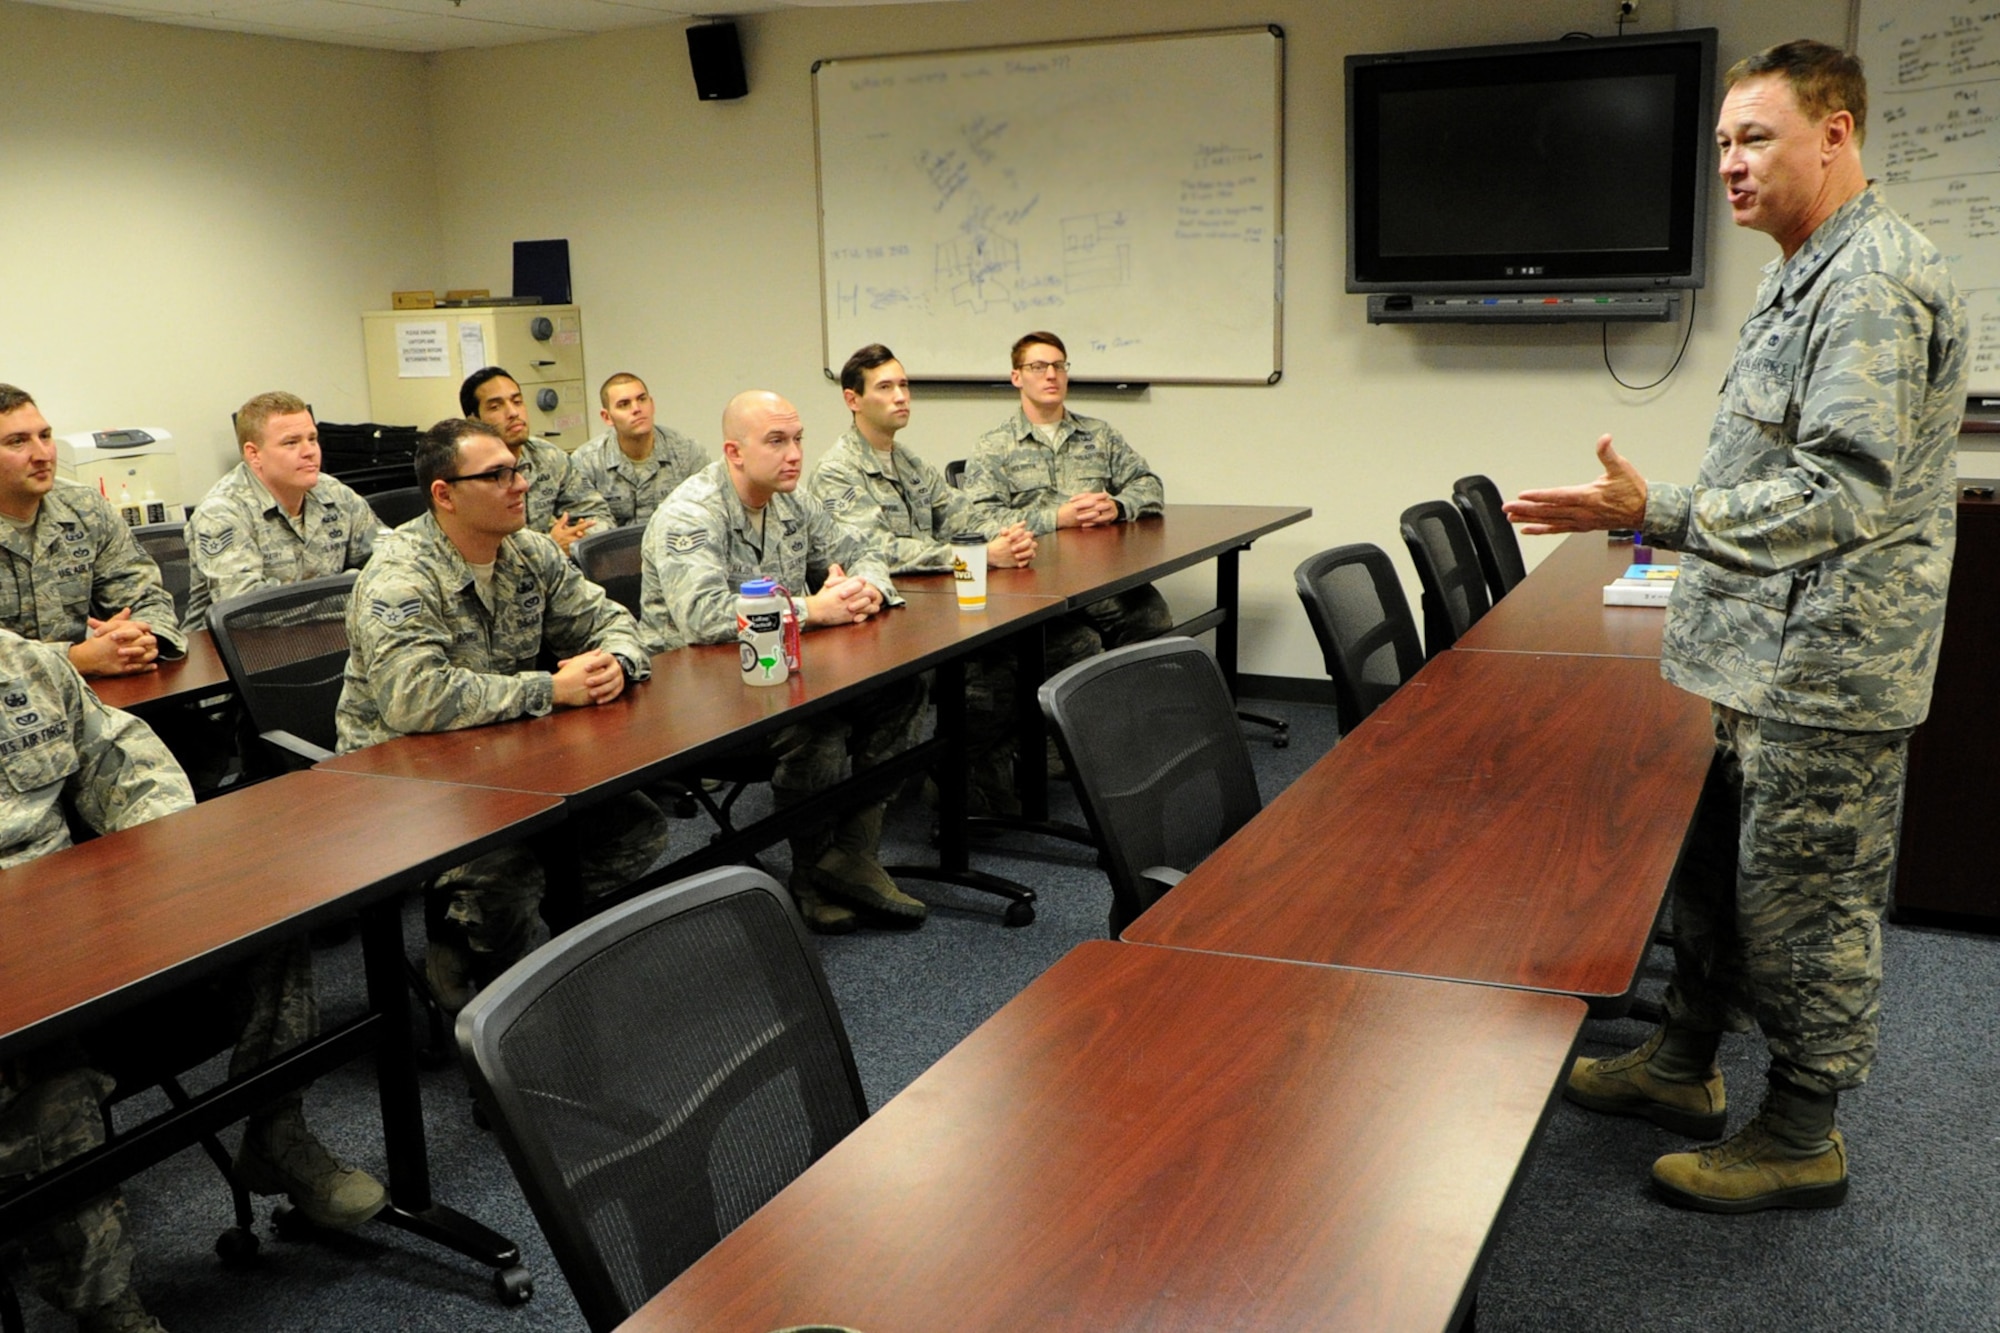 Air Force District of Washington Commander Maj. Gen. Darryl W. Burke speaks to Explosive Ordnance Disposal Airmen from the 11th Civil Engineer Squadron on Joint Base Andrews, Md., Oct. 23, 2015. Burke communicates his appreciation for the EOD Airmen’s sacrifice for the mission and recognized excellence within their career field. (U.S. Air Force photo/Staff Sgt. Matt Davis)